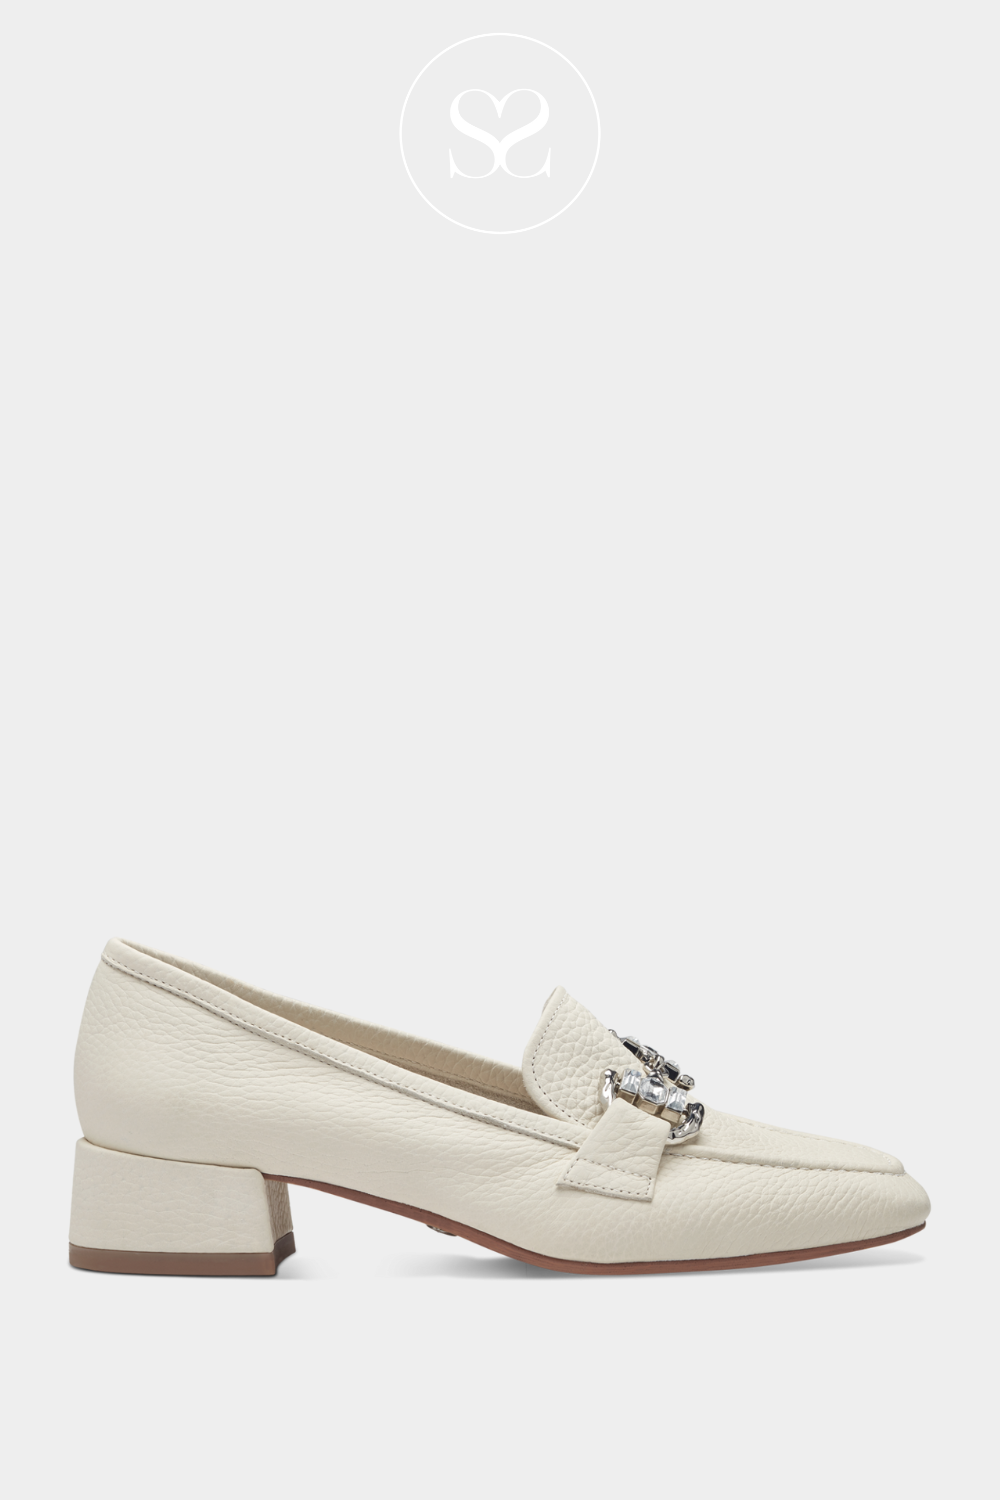 TAMARIS 1-24310-42 OFF WHITE IVORY CREAM LEATHER HEELED LOAFERS